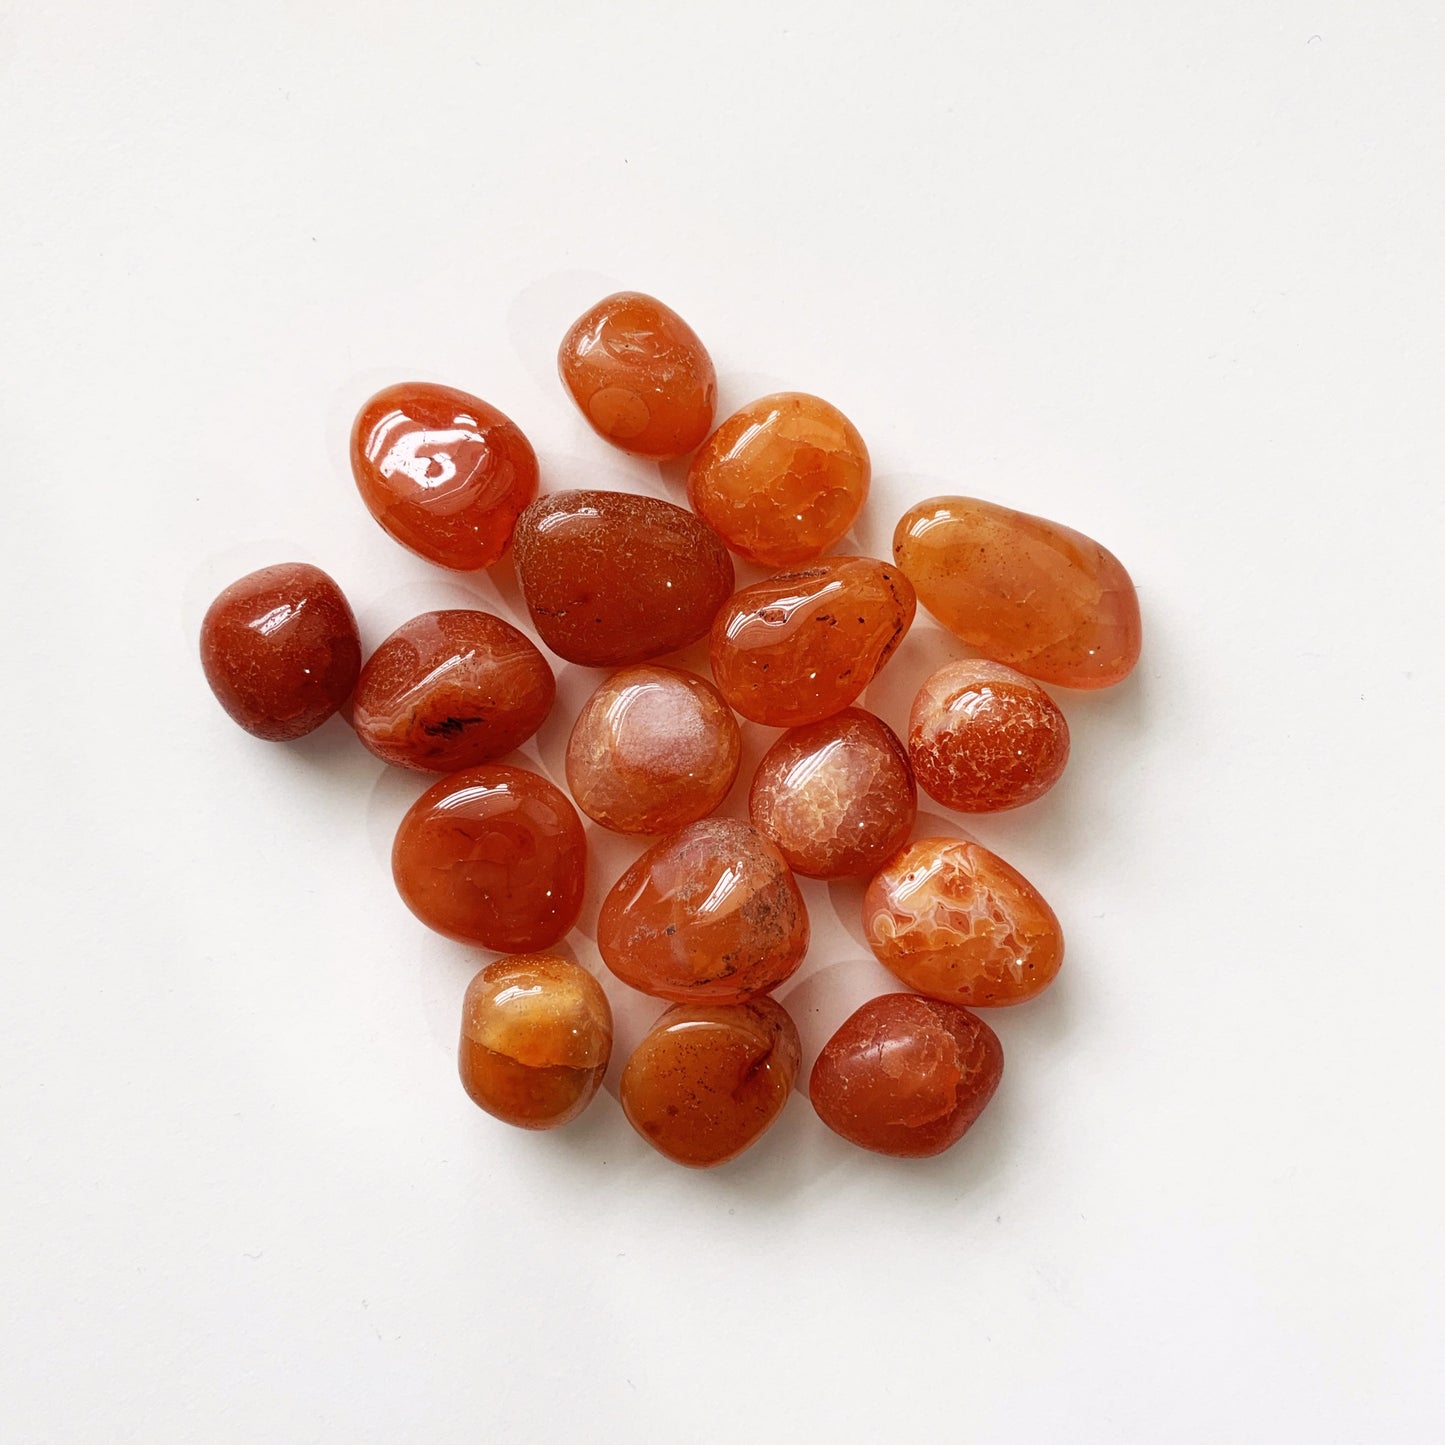 A stabilising stone, Carnelian restores vitality and motivation, and stimulates creativity. It gives courage, promotes positive life choices, dispels apathy and motivates for success. Carnelian is useful for overcoming abuse of any kind. It helps in trusting yourself and your perceptions.  Listing 1 Stone